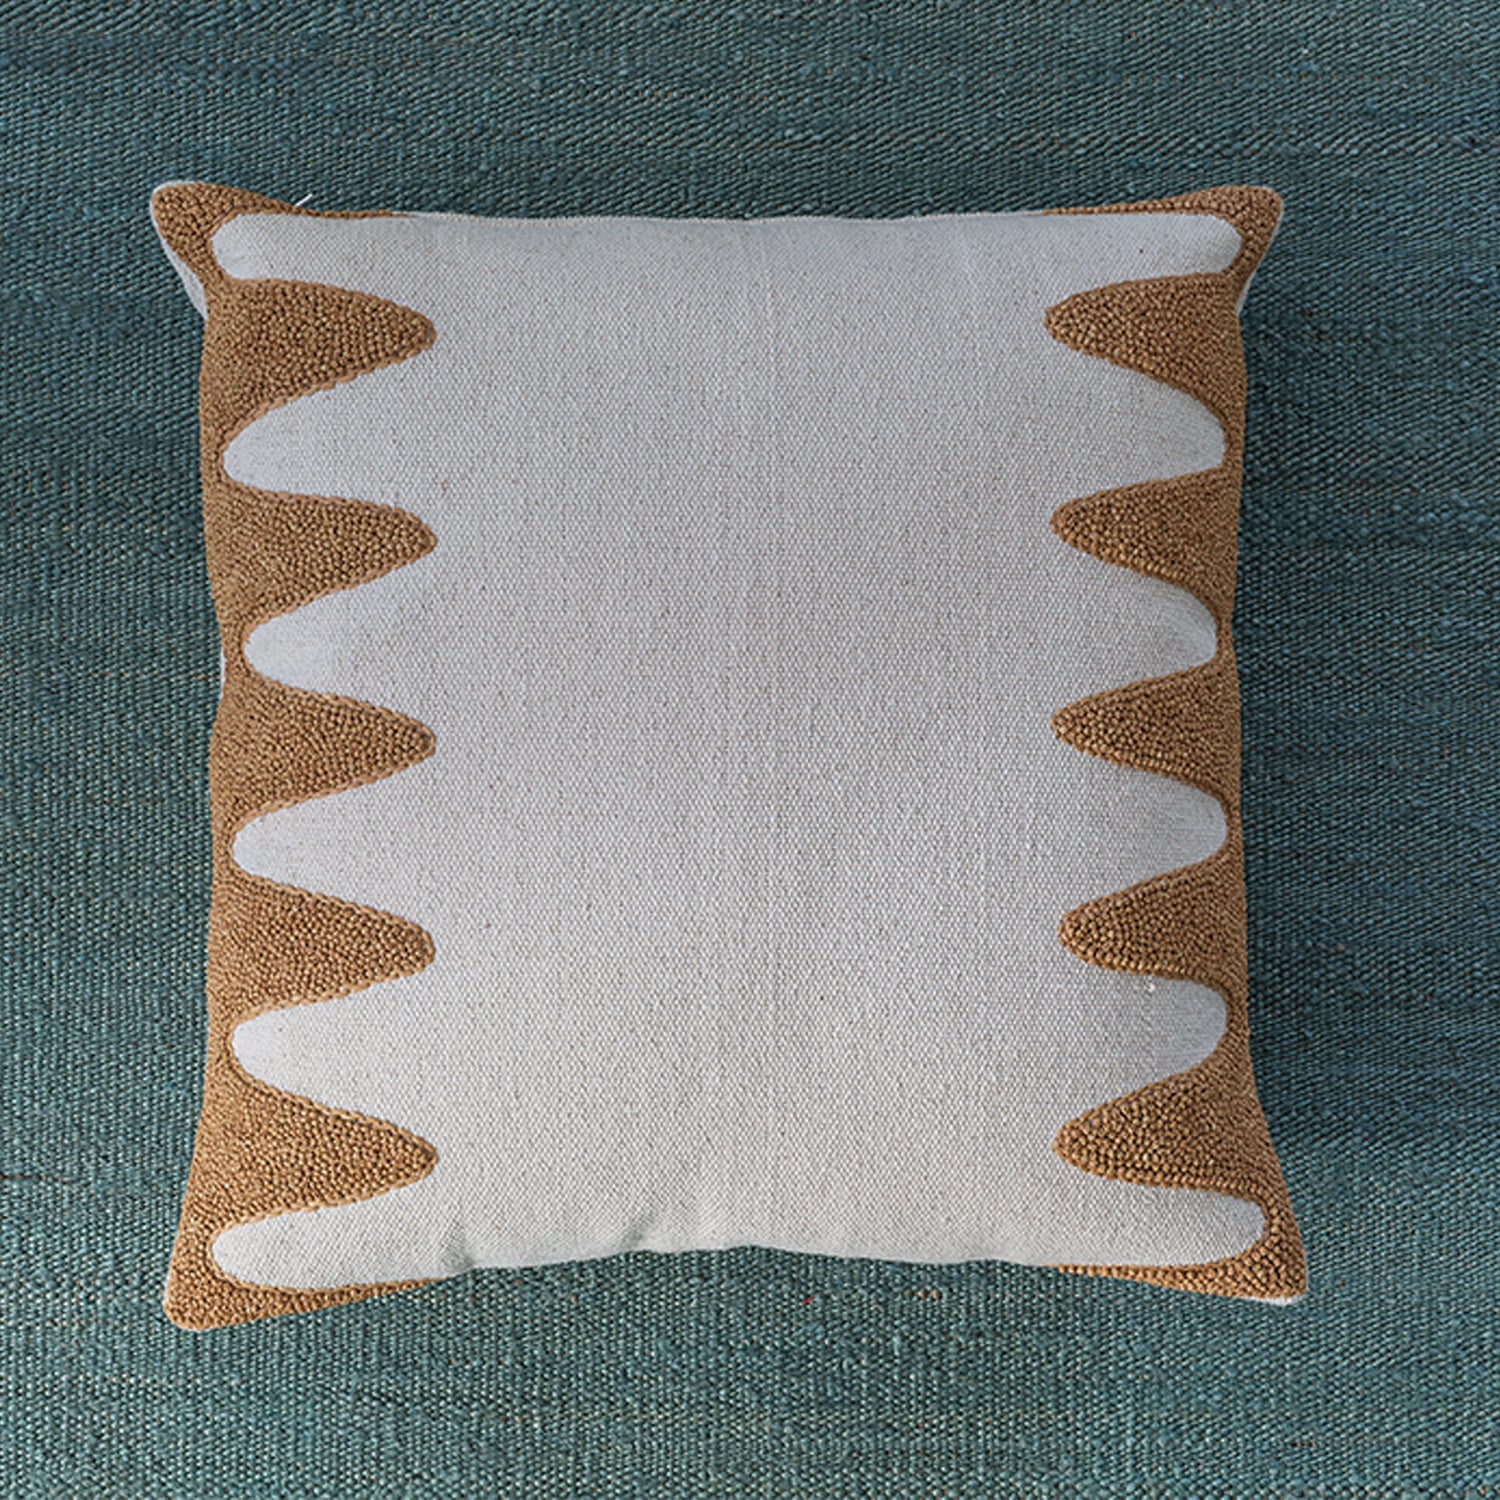 Square cream throw pillow with a wavy raffia embroidery pattern on the sides, laying on a turquoise fabric background.